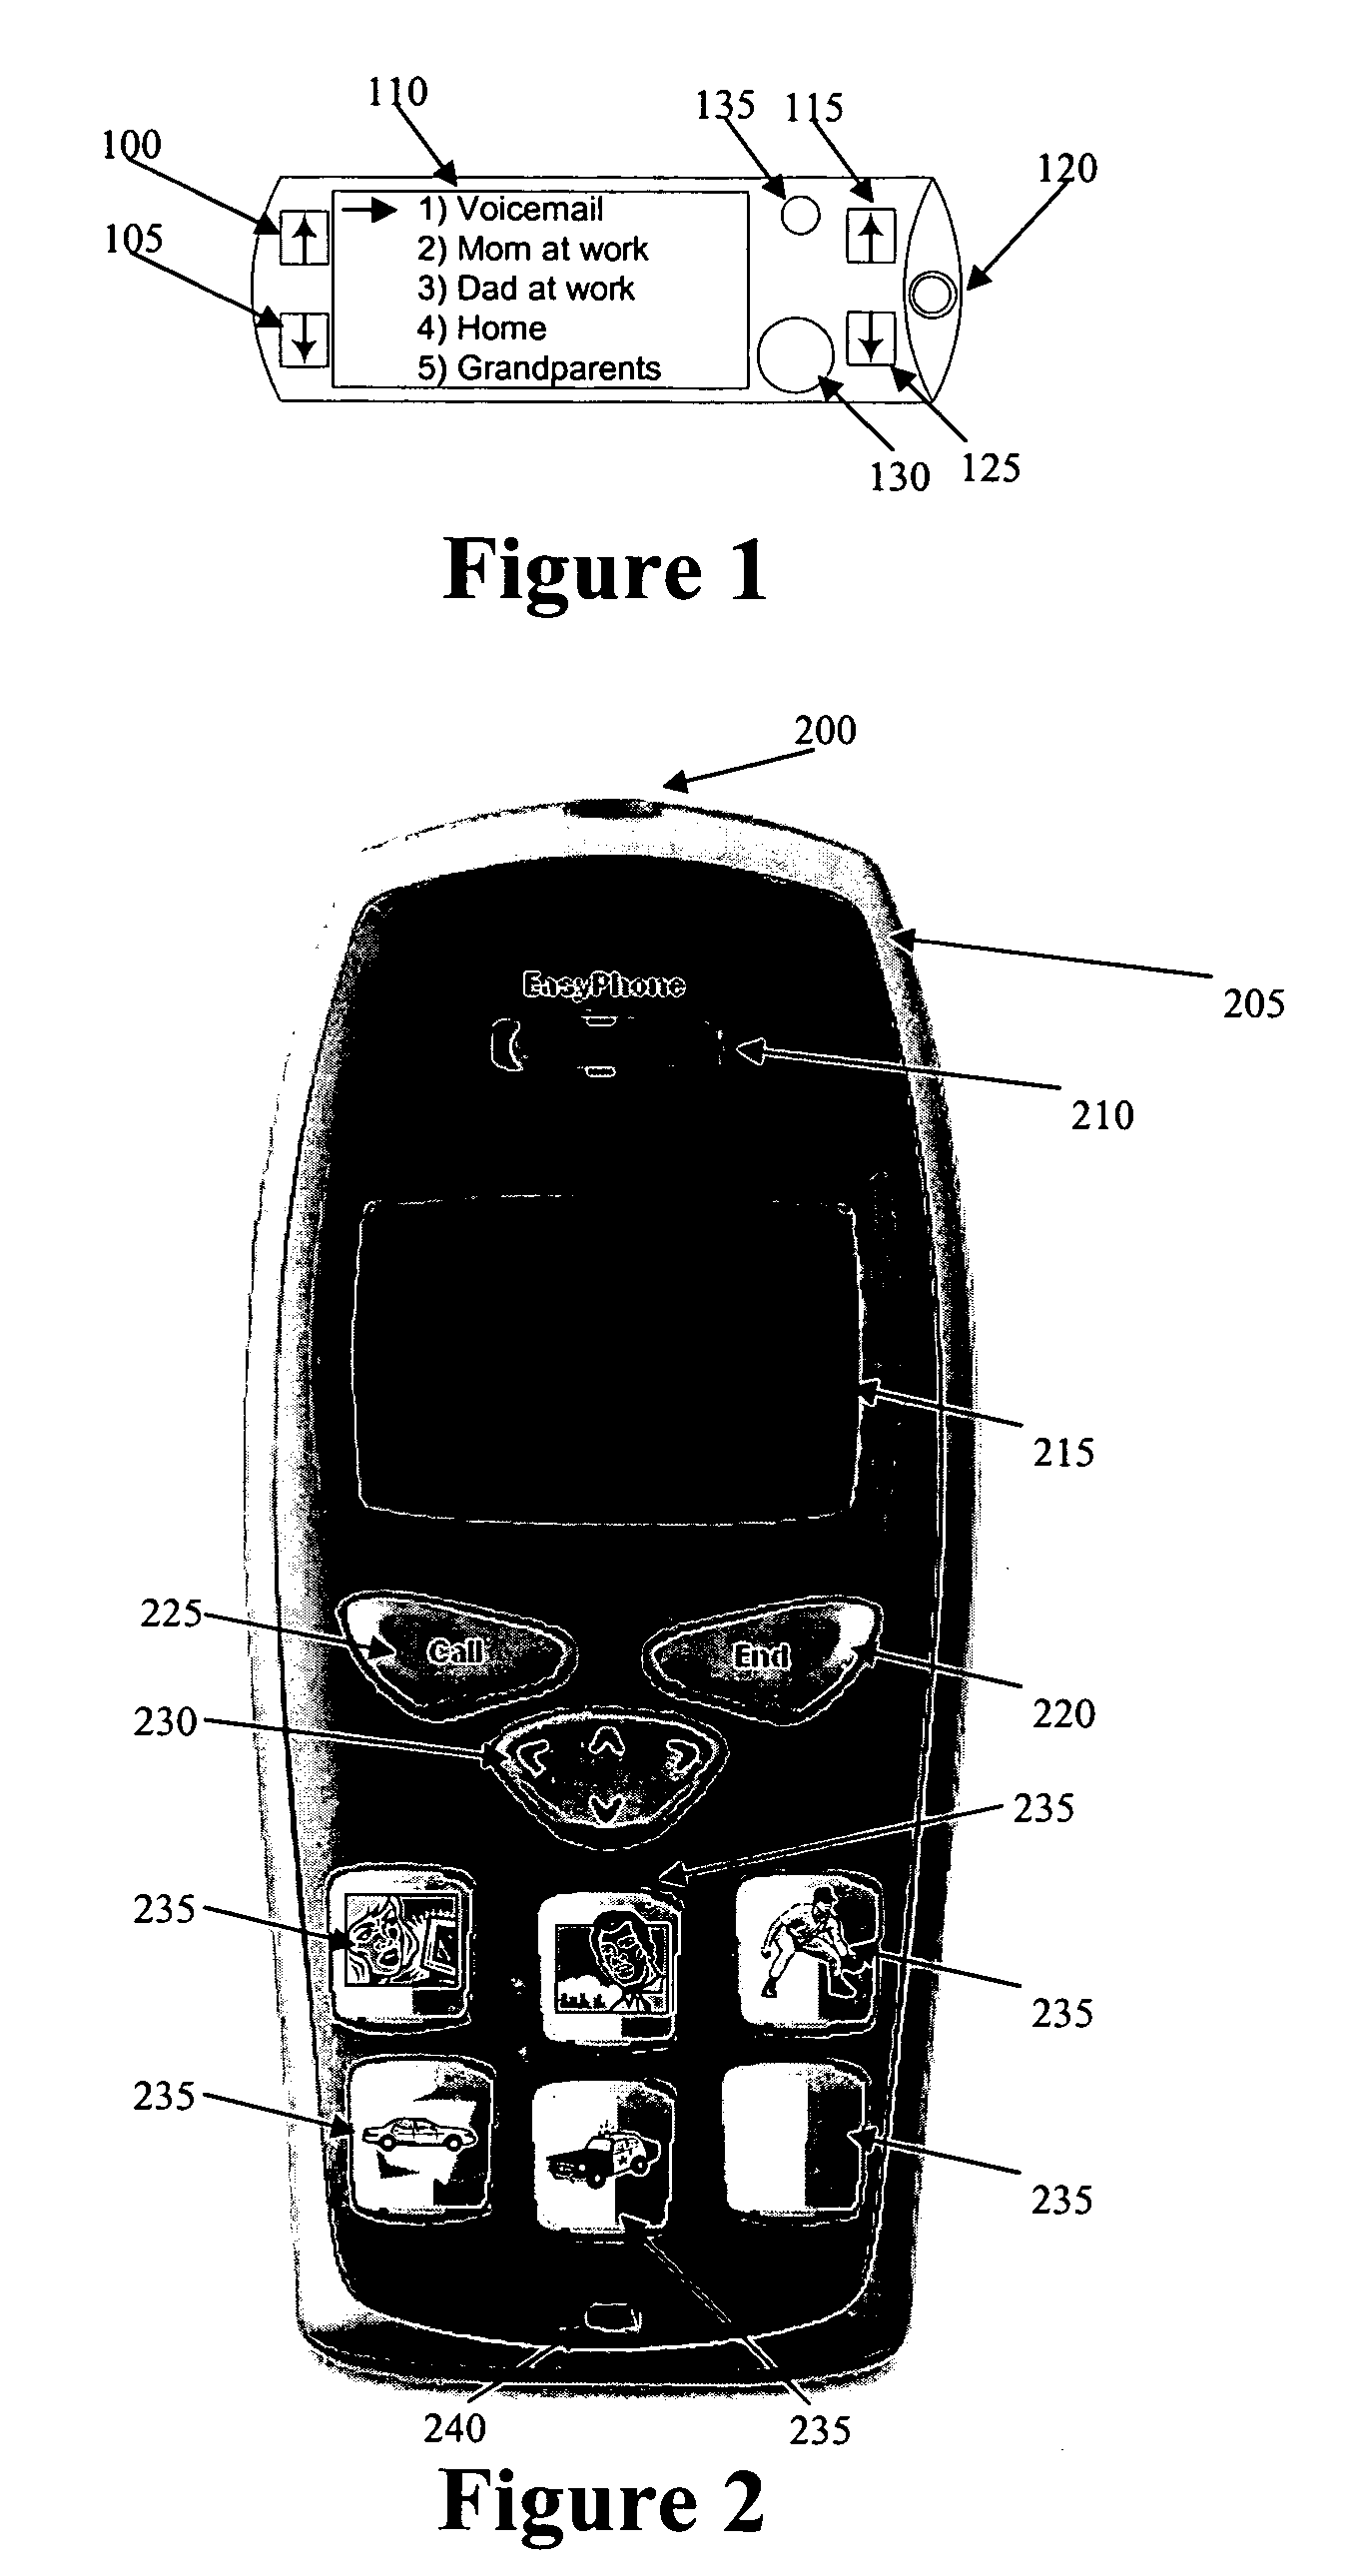 Methods for controlling telephone position reporting